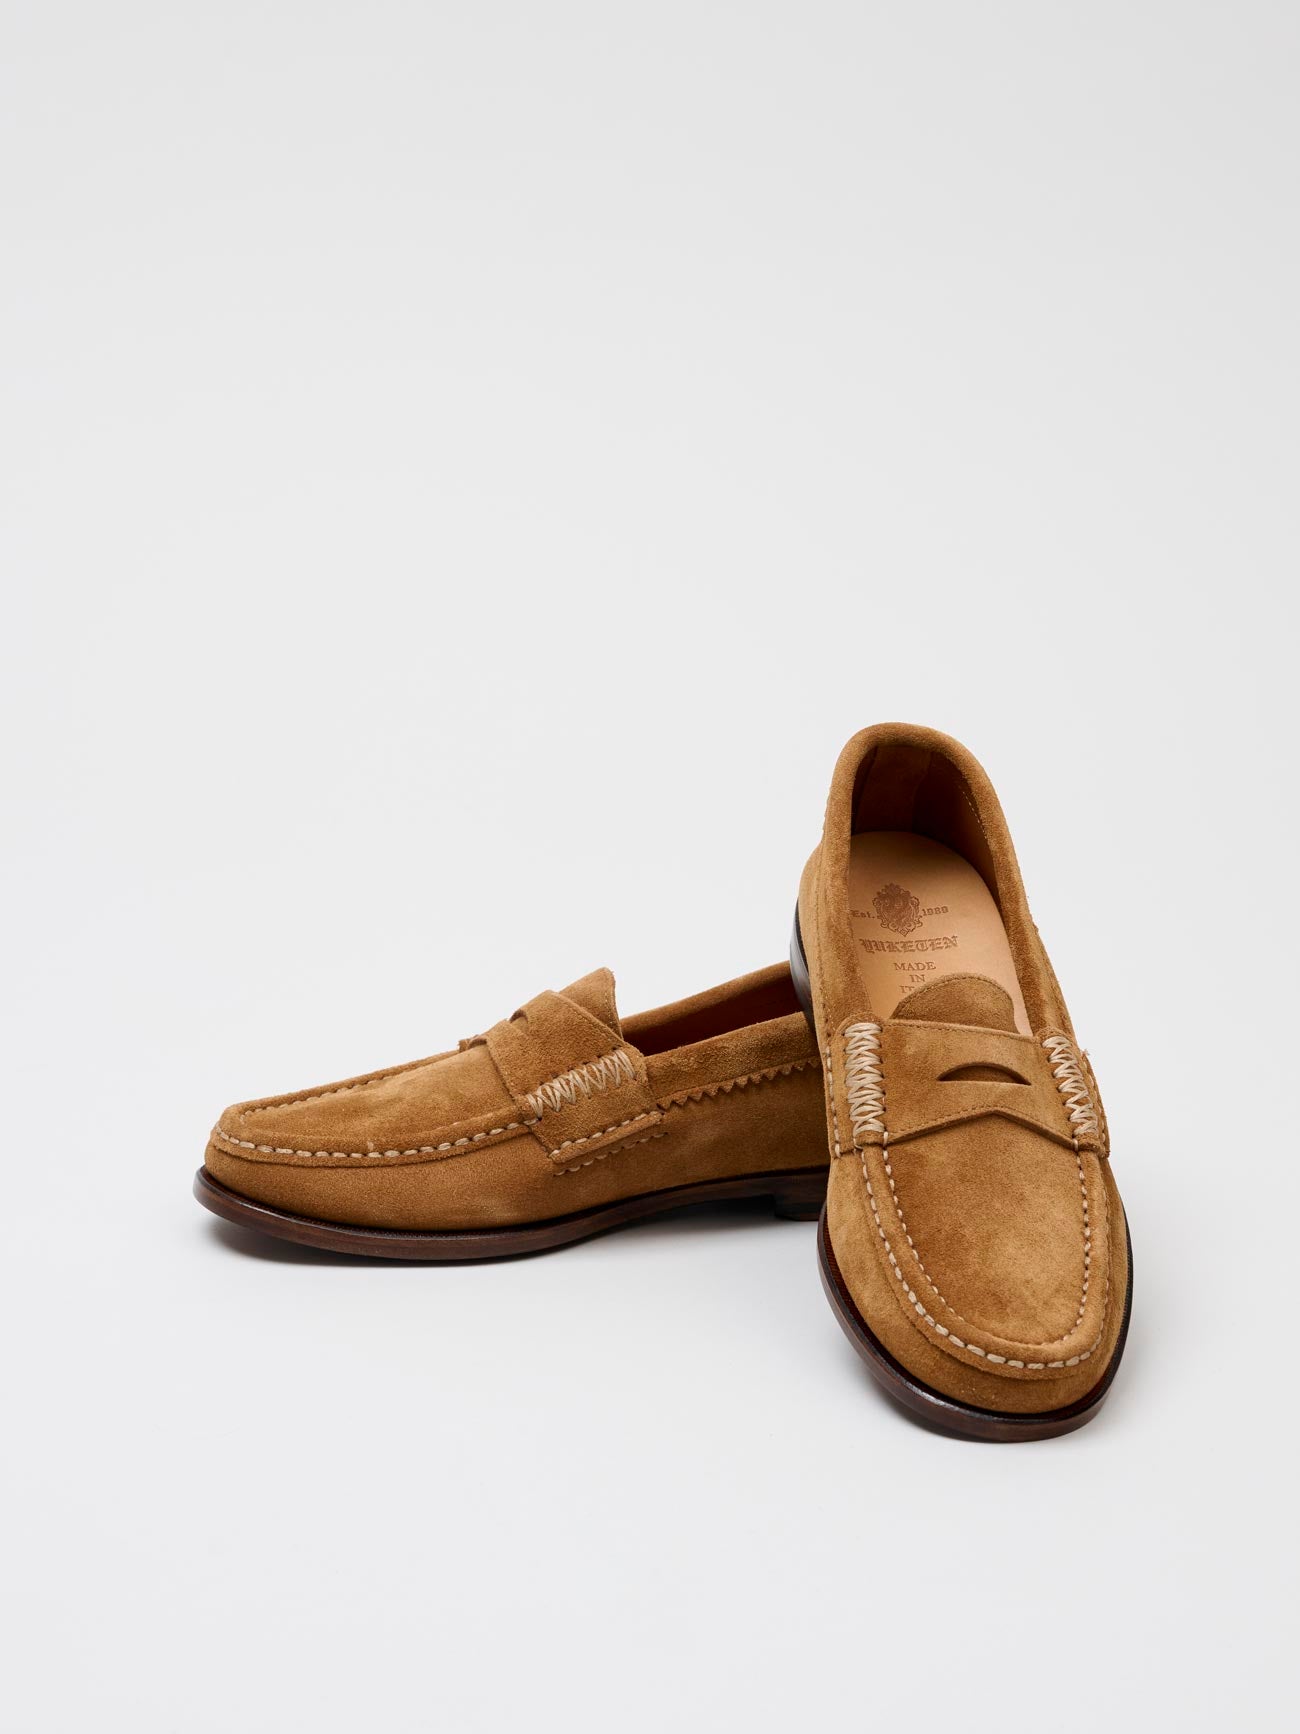 Rob's Loafer, Tosca G Brown